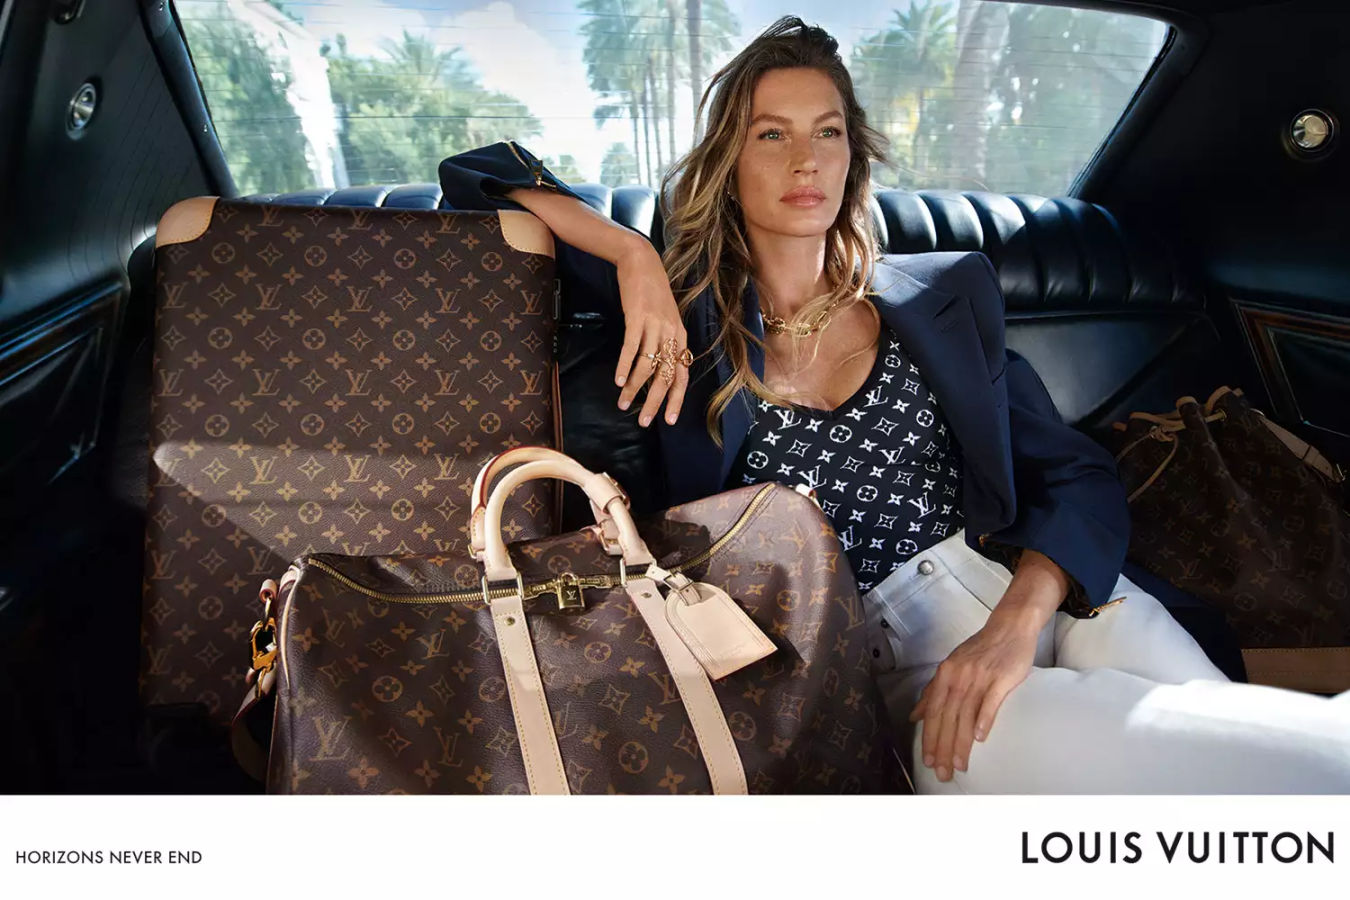 A view of a Louis Vuitton advertisement campaign featuring Lionel